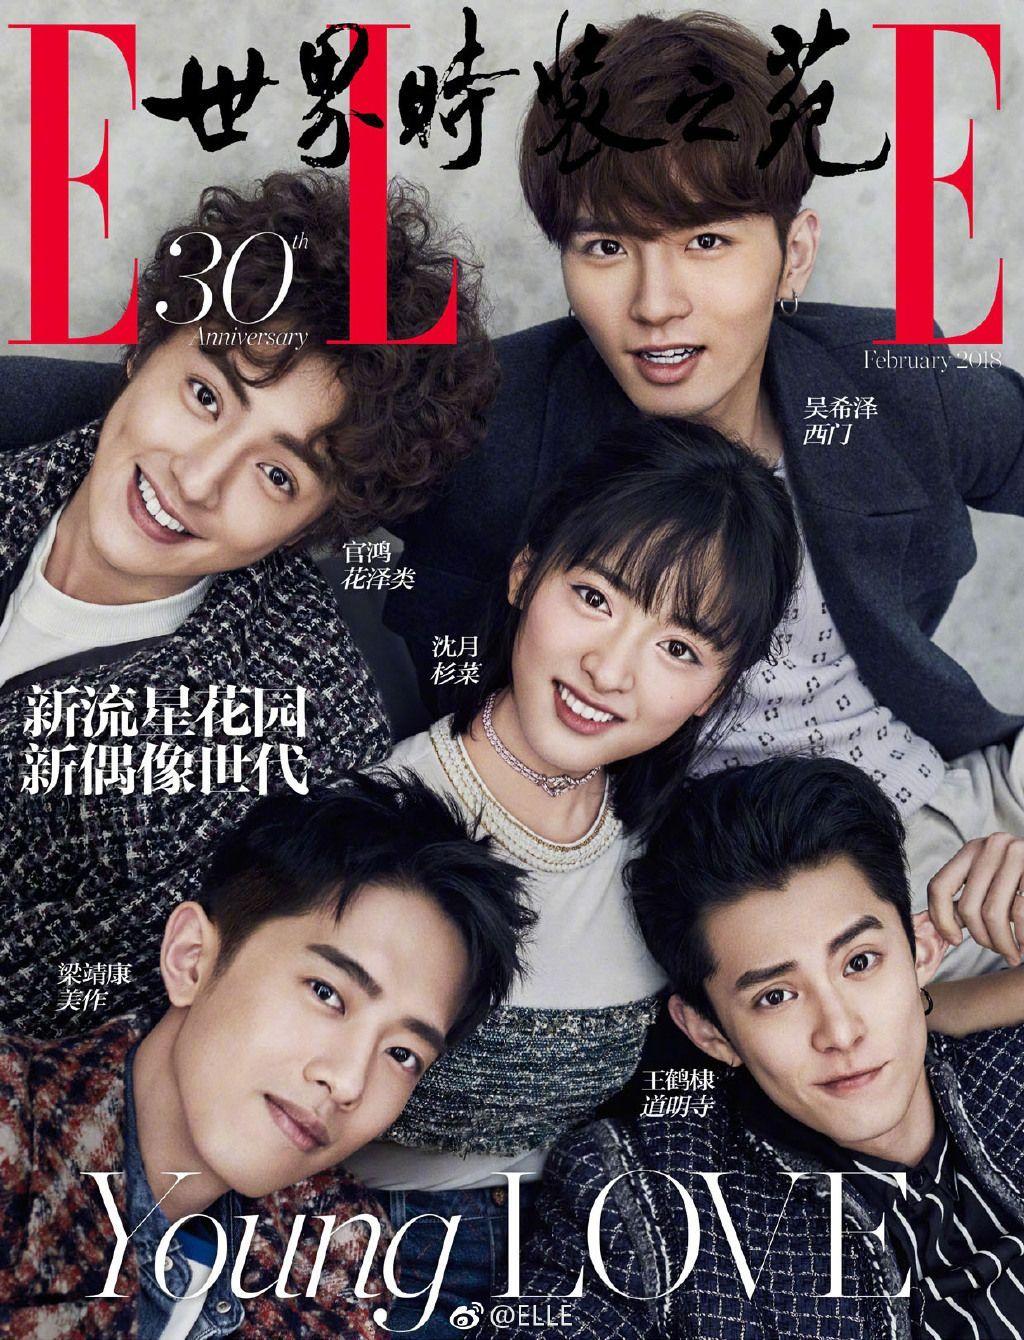 DramaPanda: Shen Yue together with F4 in their first group pictorial